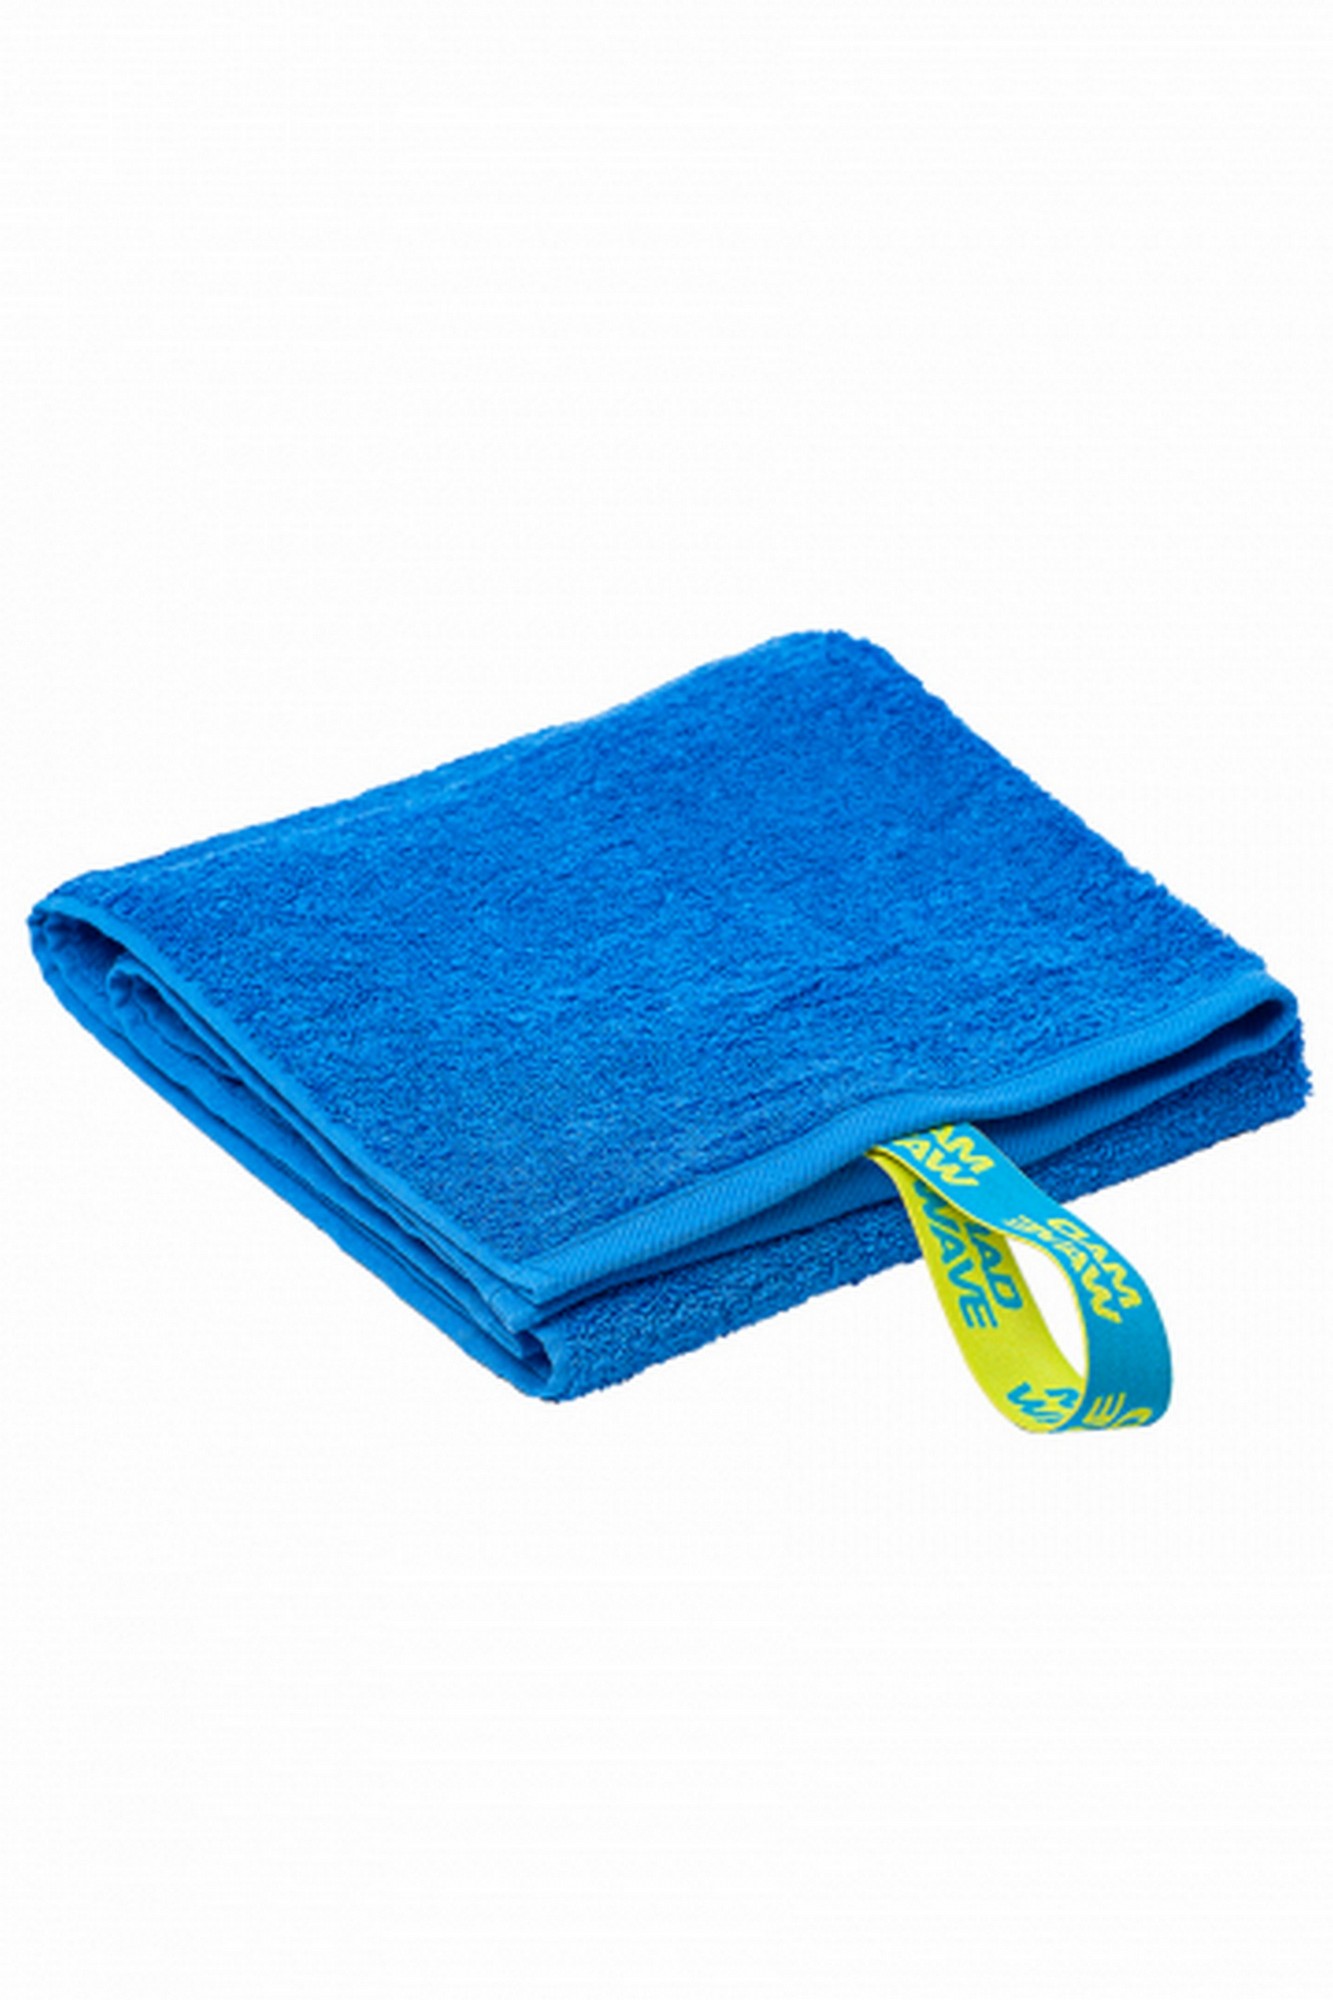  Mad Wave Cotton Sort Terry Towel M0762 01 1 04W 